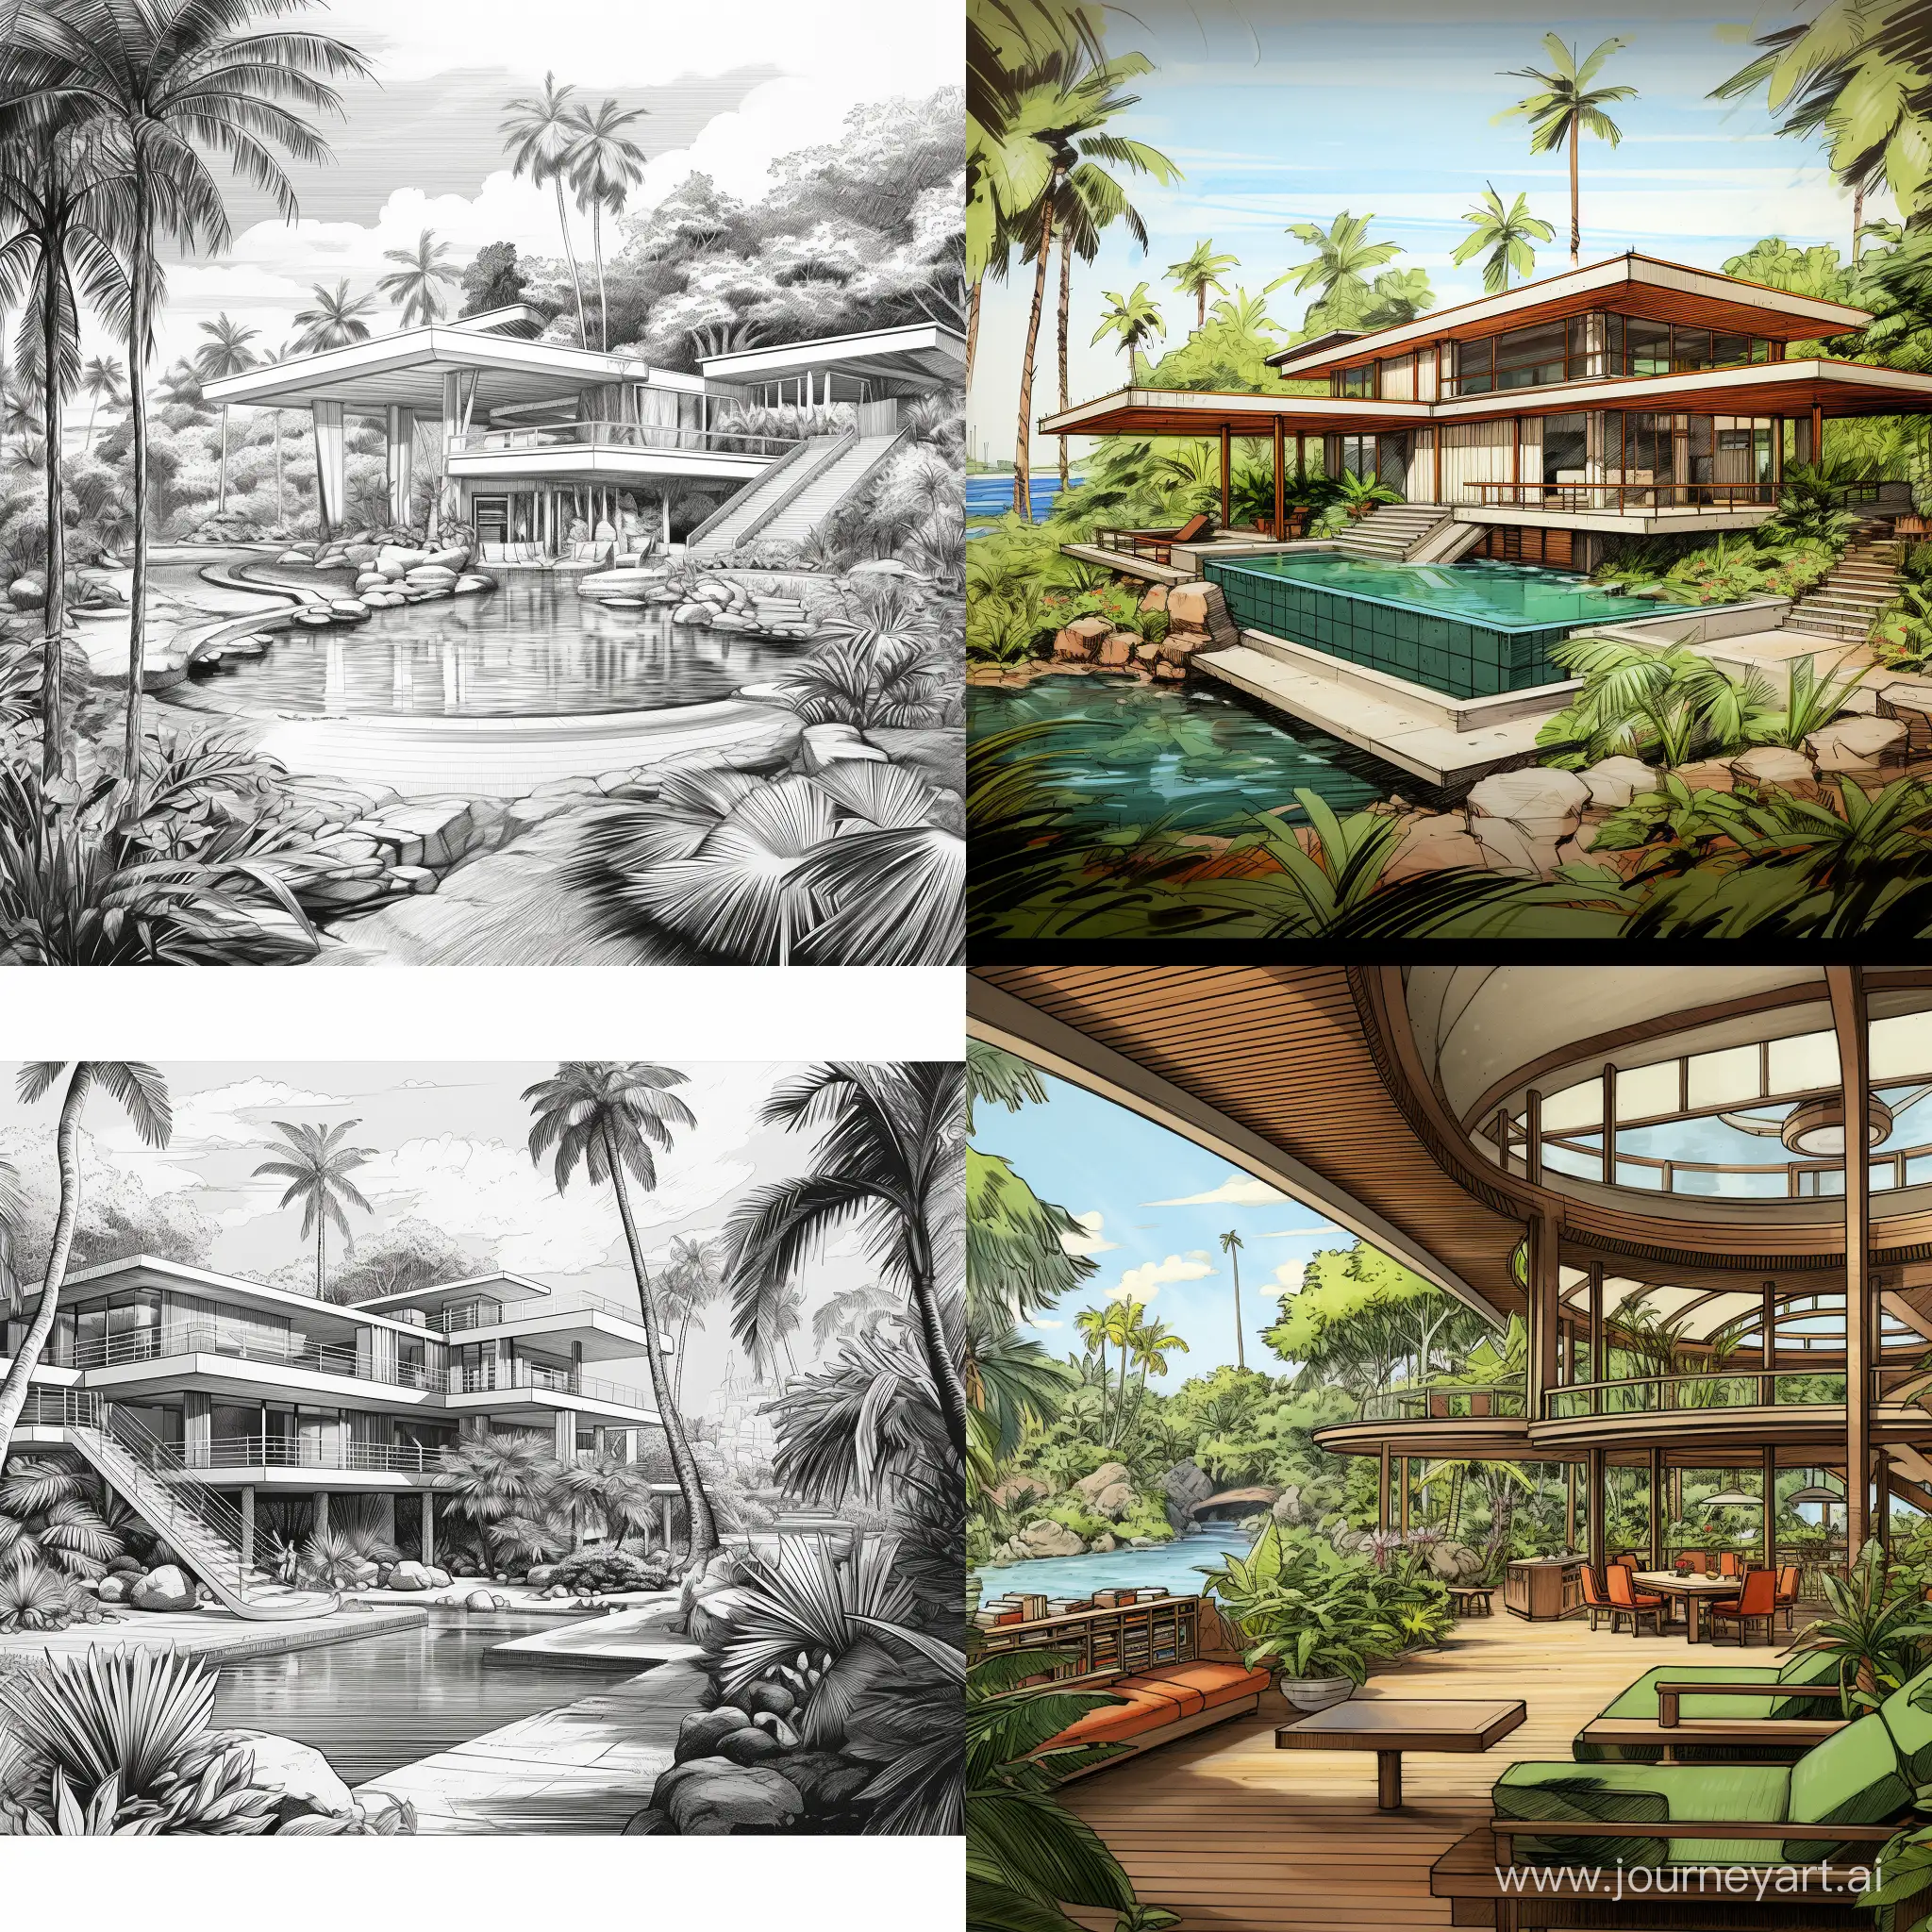 Visually stunning and architecturally sophisticated images embodying the mid-century modern style influenced by the works of Frank Lloyd Wright, John Lautner and Ludwig Vies Van De Rohe. The setting for this architectural marvel should be a paradise caribbean tropical landscape, with lush vegetation, serene waters, and an overall atmosphere of tranquility. 8k, HQ. Pencil Sketch. 